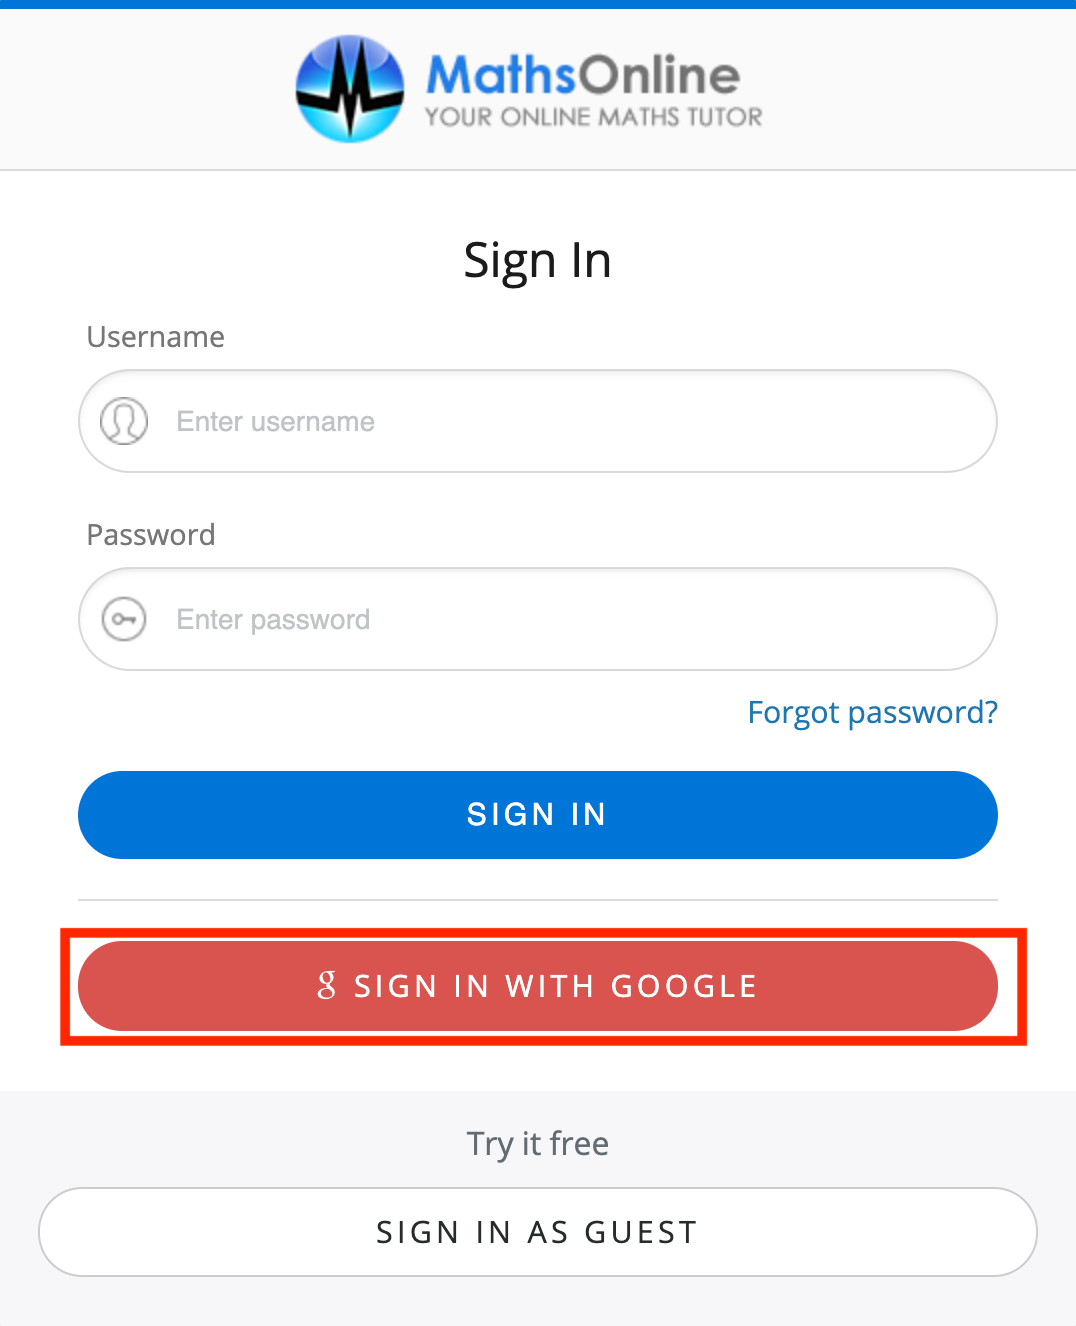 Sign In with Google